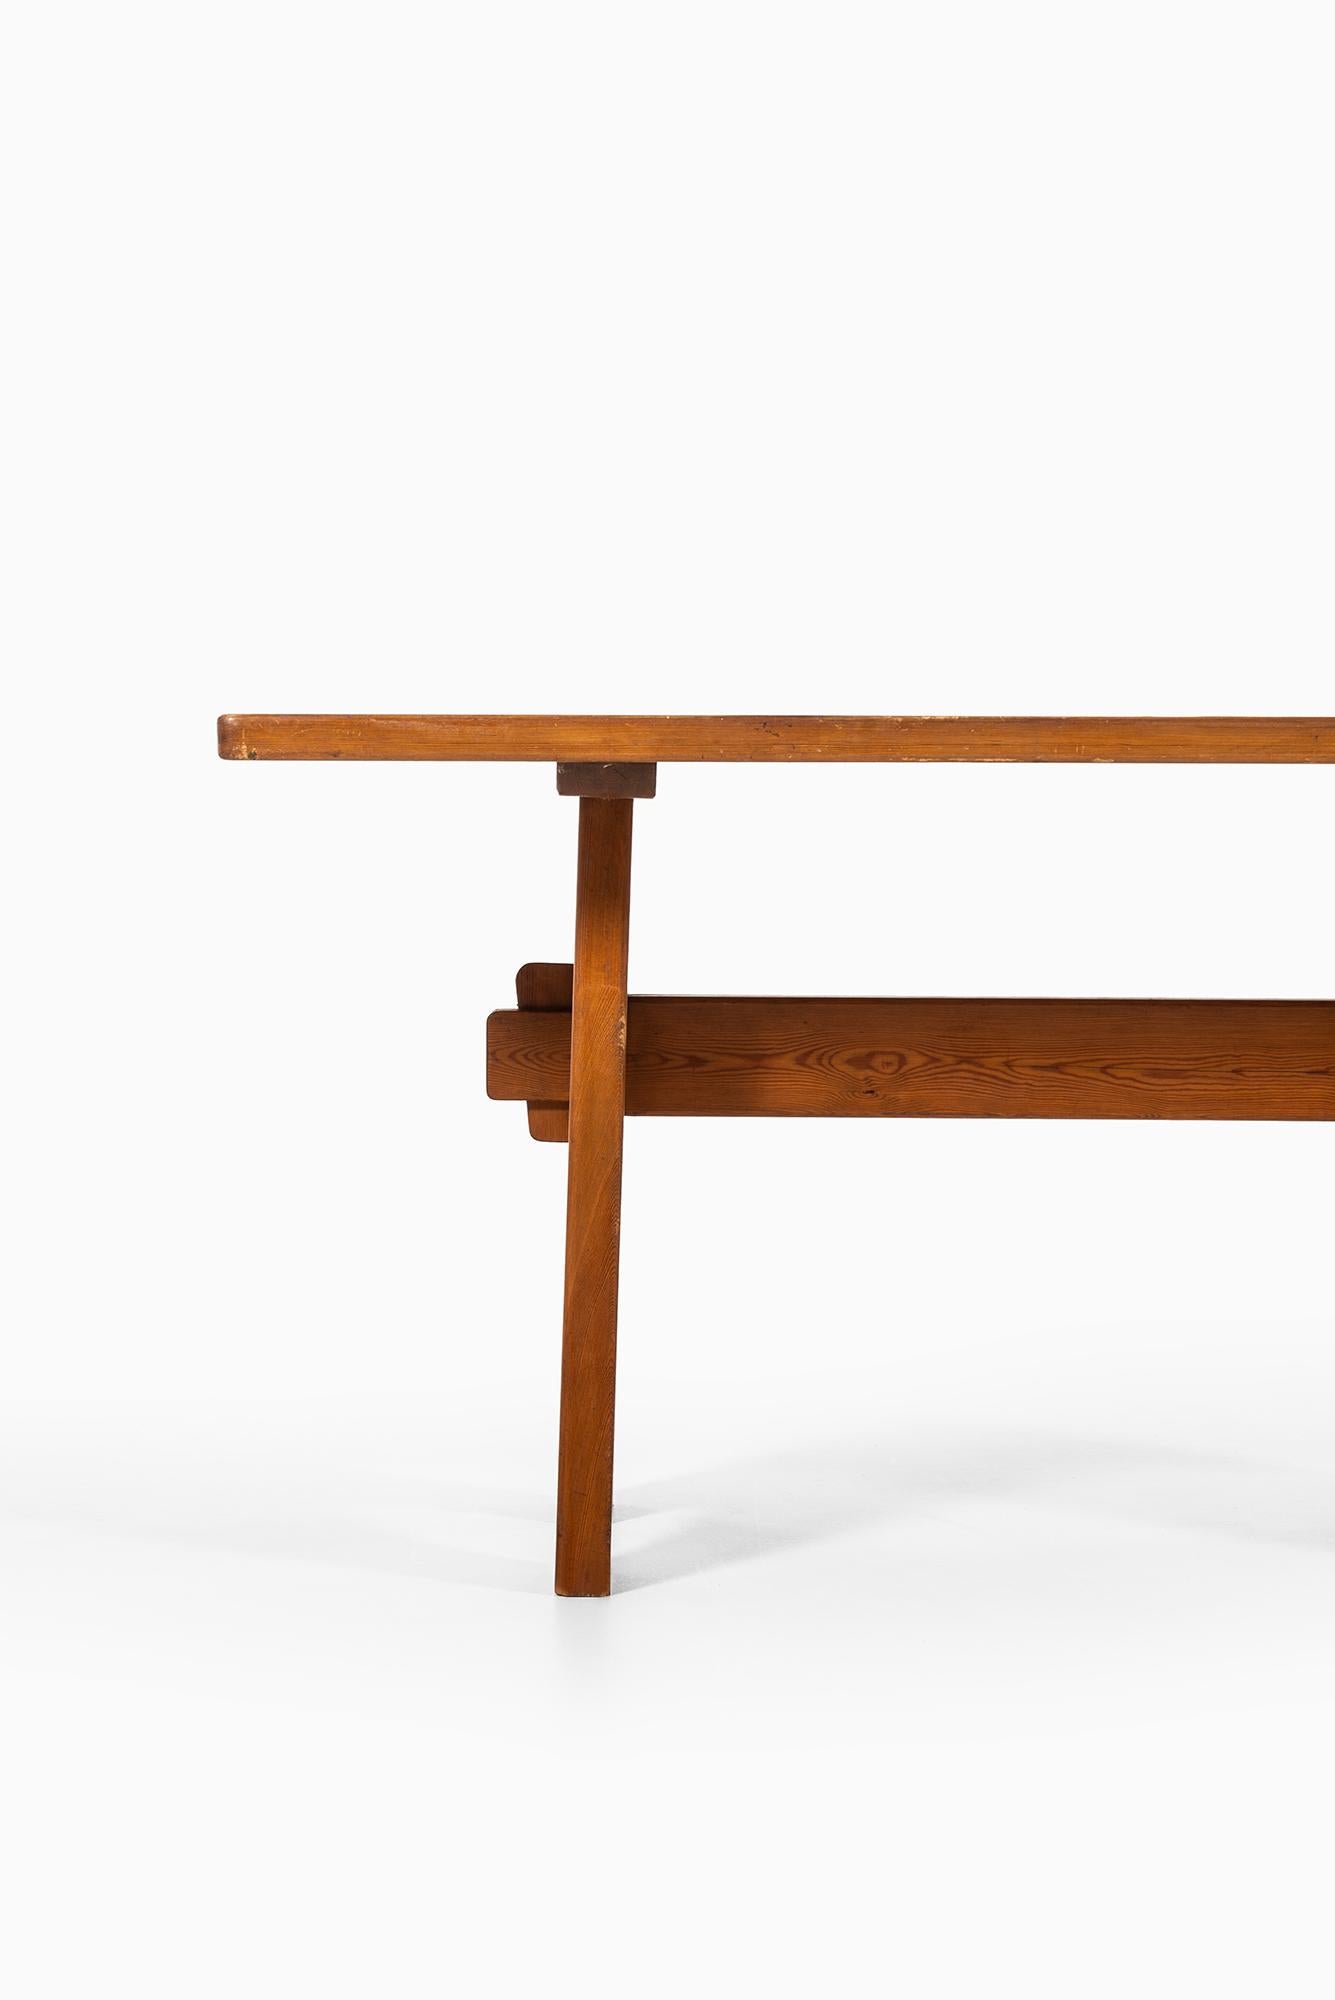 Scandinavian Modern Axel Einar Hjorth Attributed Dining Table in Pine Produced in Sweden